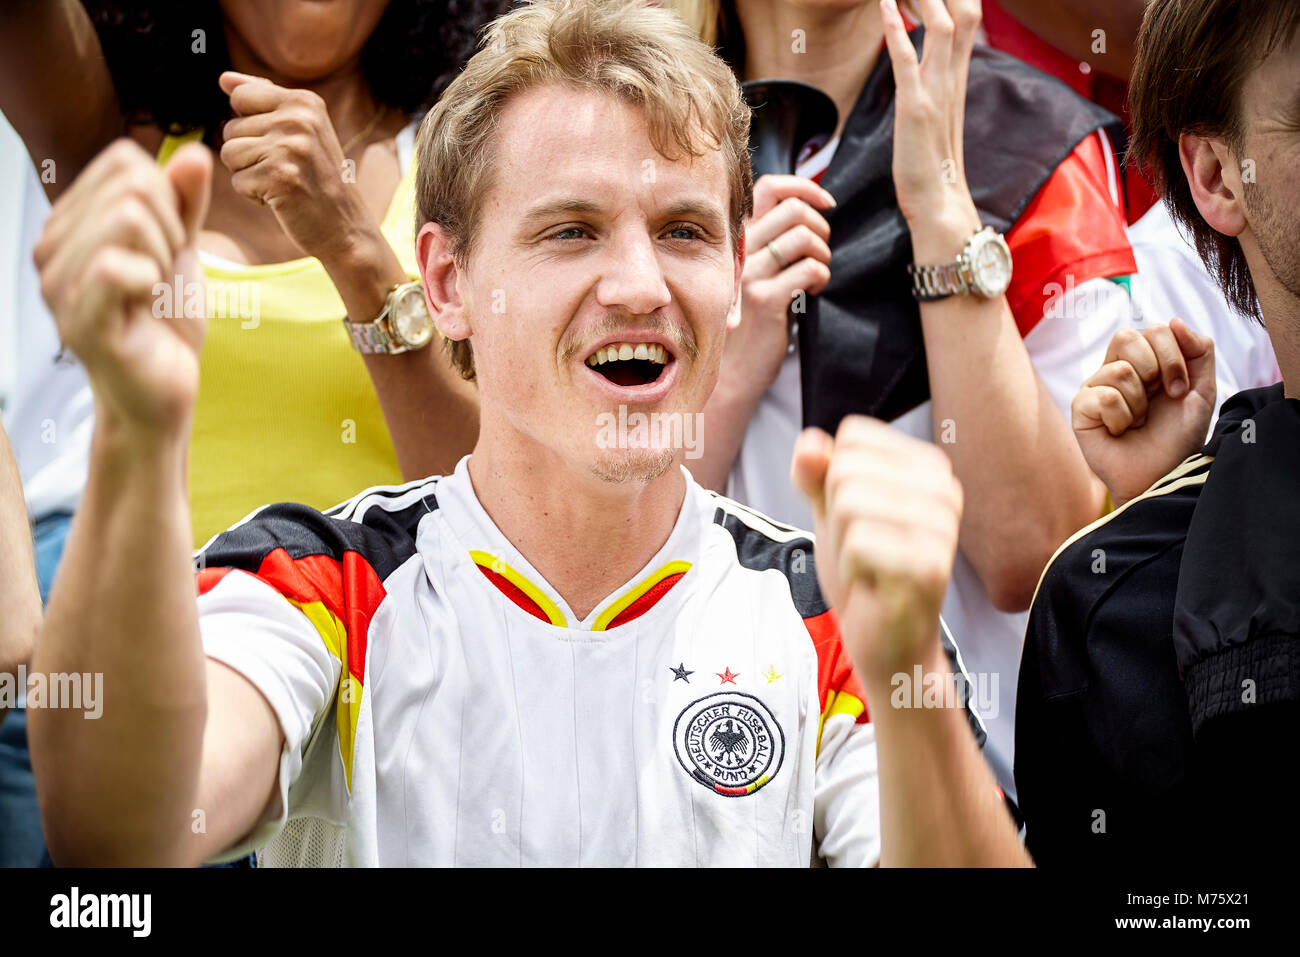 German football supporter cheering at match Stock Photo